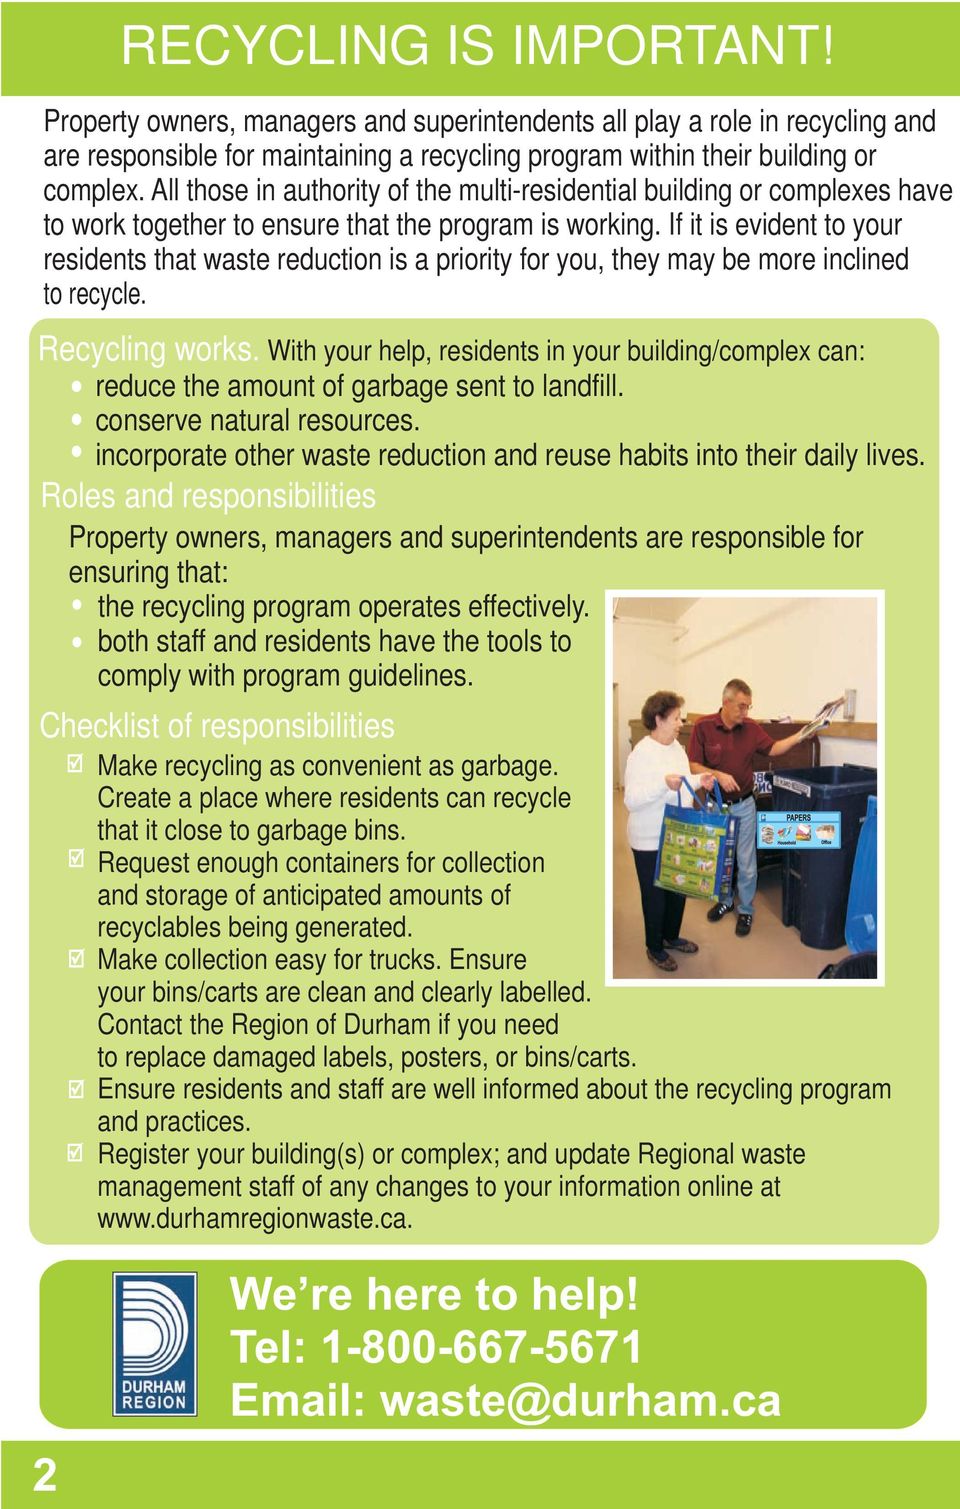 If it is evident to your residents that waste reduction is a priority for you, they may be more inclined to recycle. Recycling works.